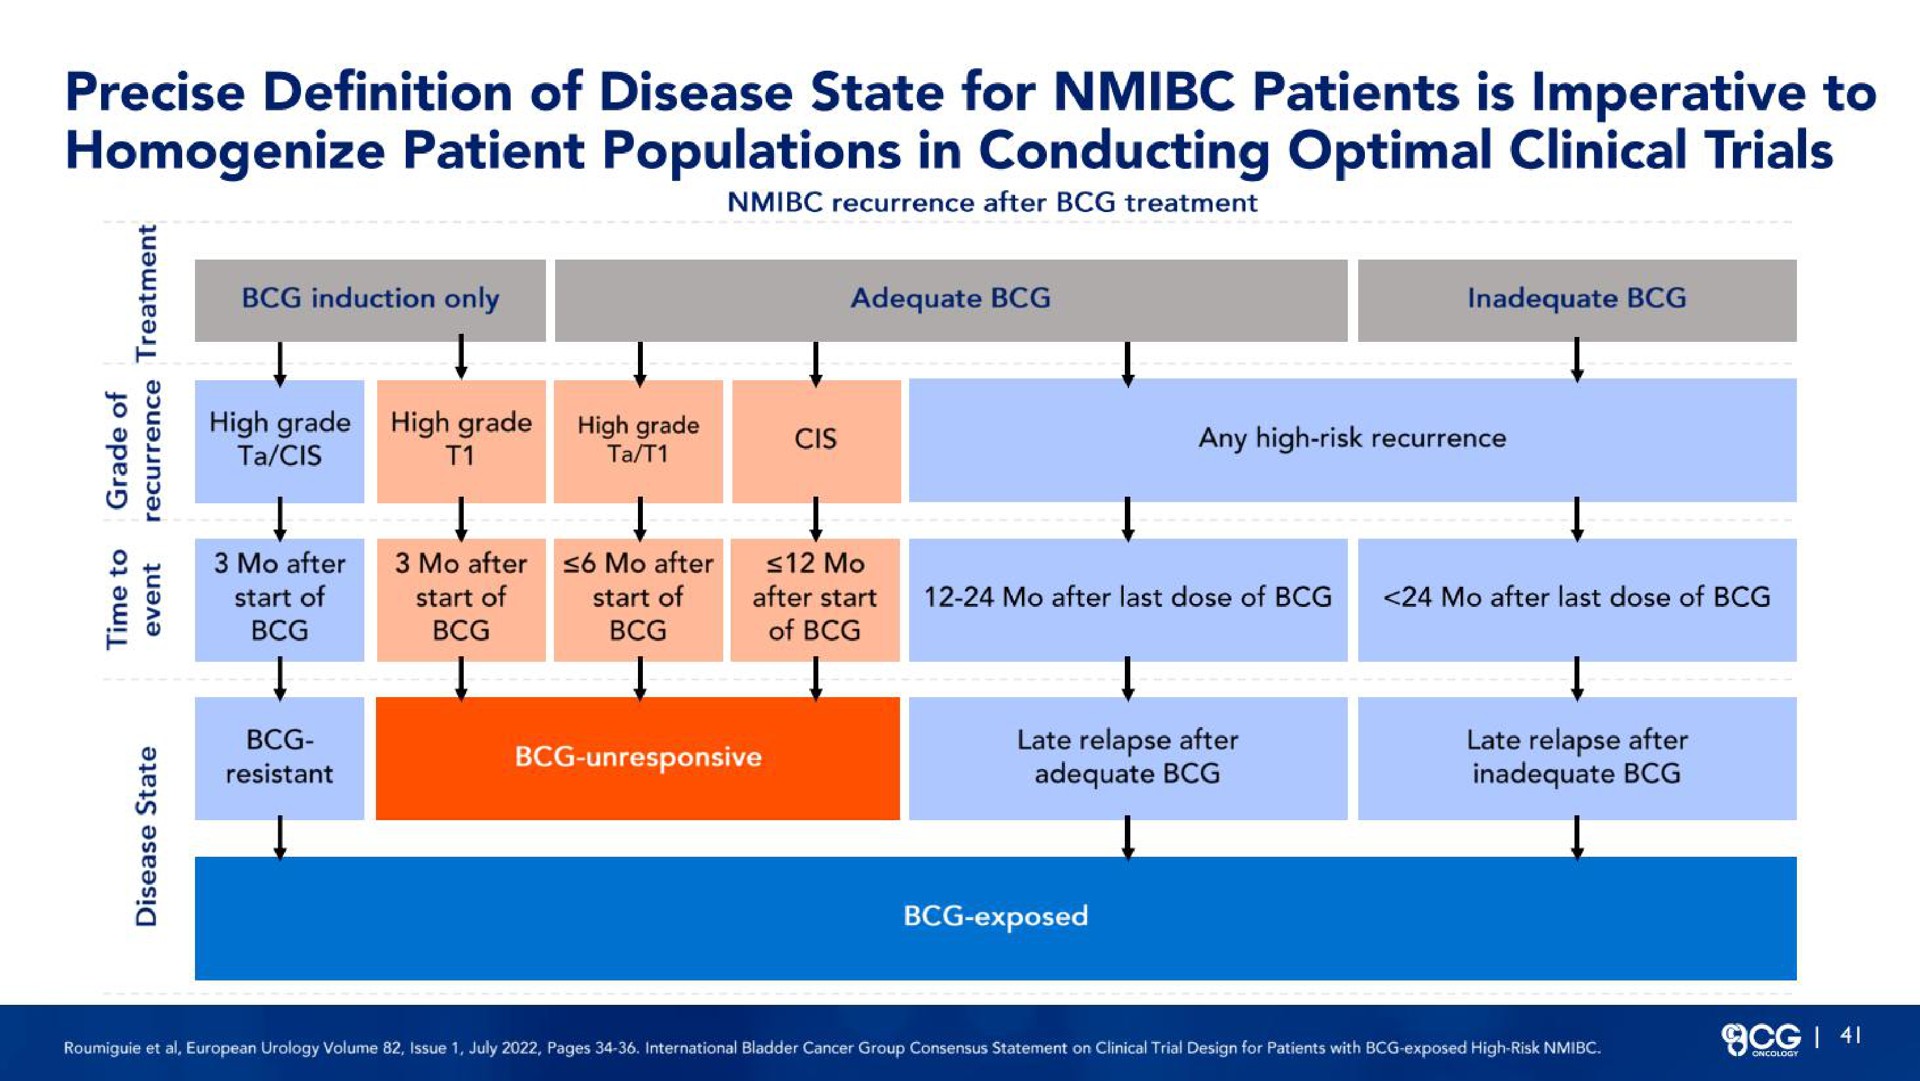 precise definition of disease state for patients is imperative to homogenize patient populations in conducting optimal clinical trials fee | CG Oncology